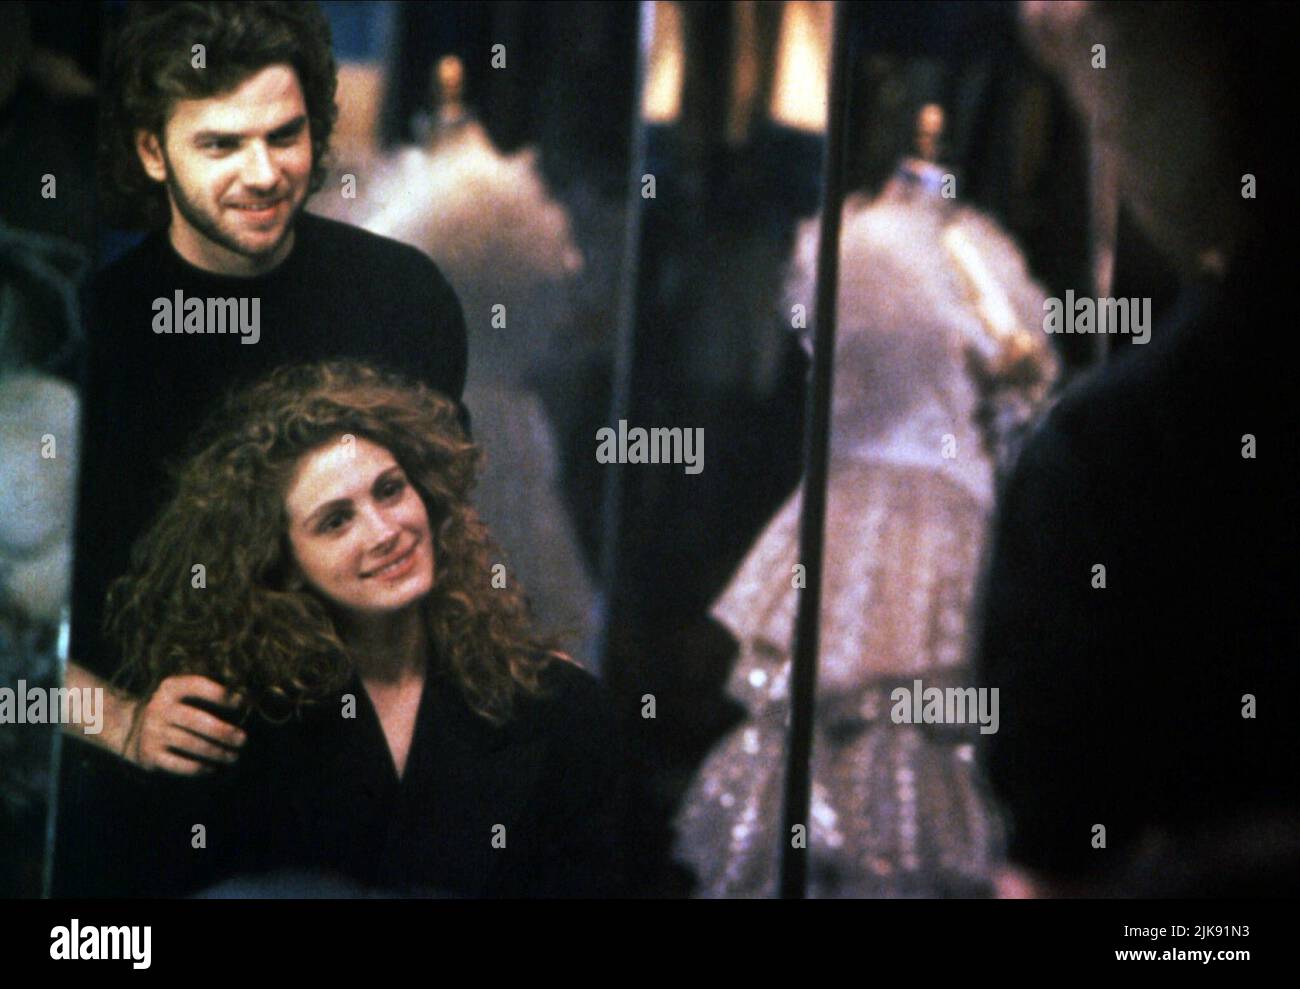 https://c8.alamy.com/comp/2JK91N3/kevin-anderson-julia-roberts-film-sleeping-with-the-enemy-1994-characters-ben-woodward-laura-burney-director-joseph-ruben-08-february-1991-warning-this-photograph-is-for-editorial-use-only-and-is-the-copyright-of-20-century-fox-andor-the-photographer-assigned-by-the-film-or-production-company-and-can-only-be-reproduced-by-publications-in-conjunction-with-the-promotion-of-the-above-film-a-mandatory-credit-to-20-century-fox-is-required-the-photographer-should-also-be-credited-when-known-no-commercial-use-can-be-granted-without-written-authority-from-the-film-company-2JK91N3.jpg